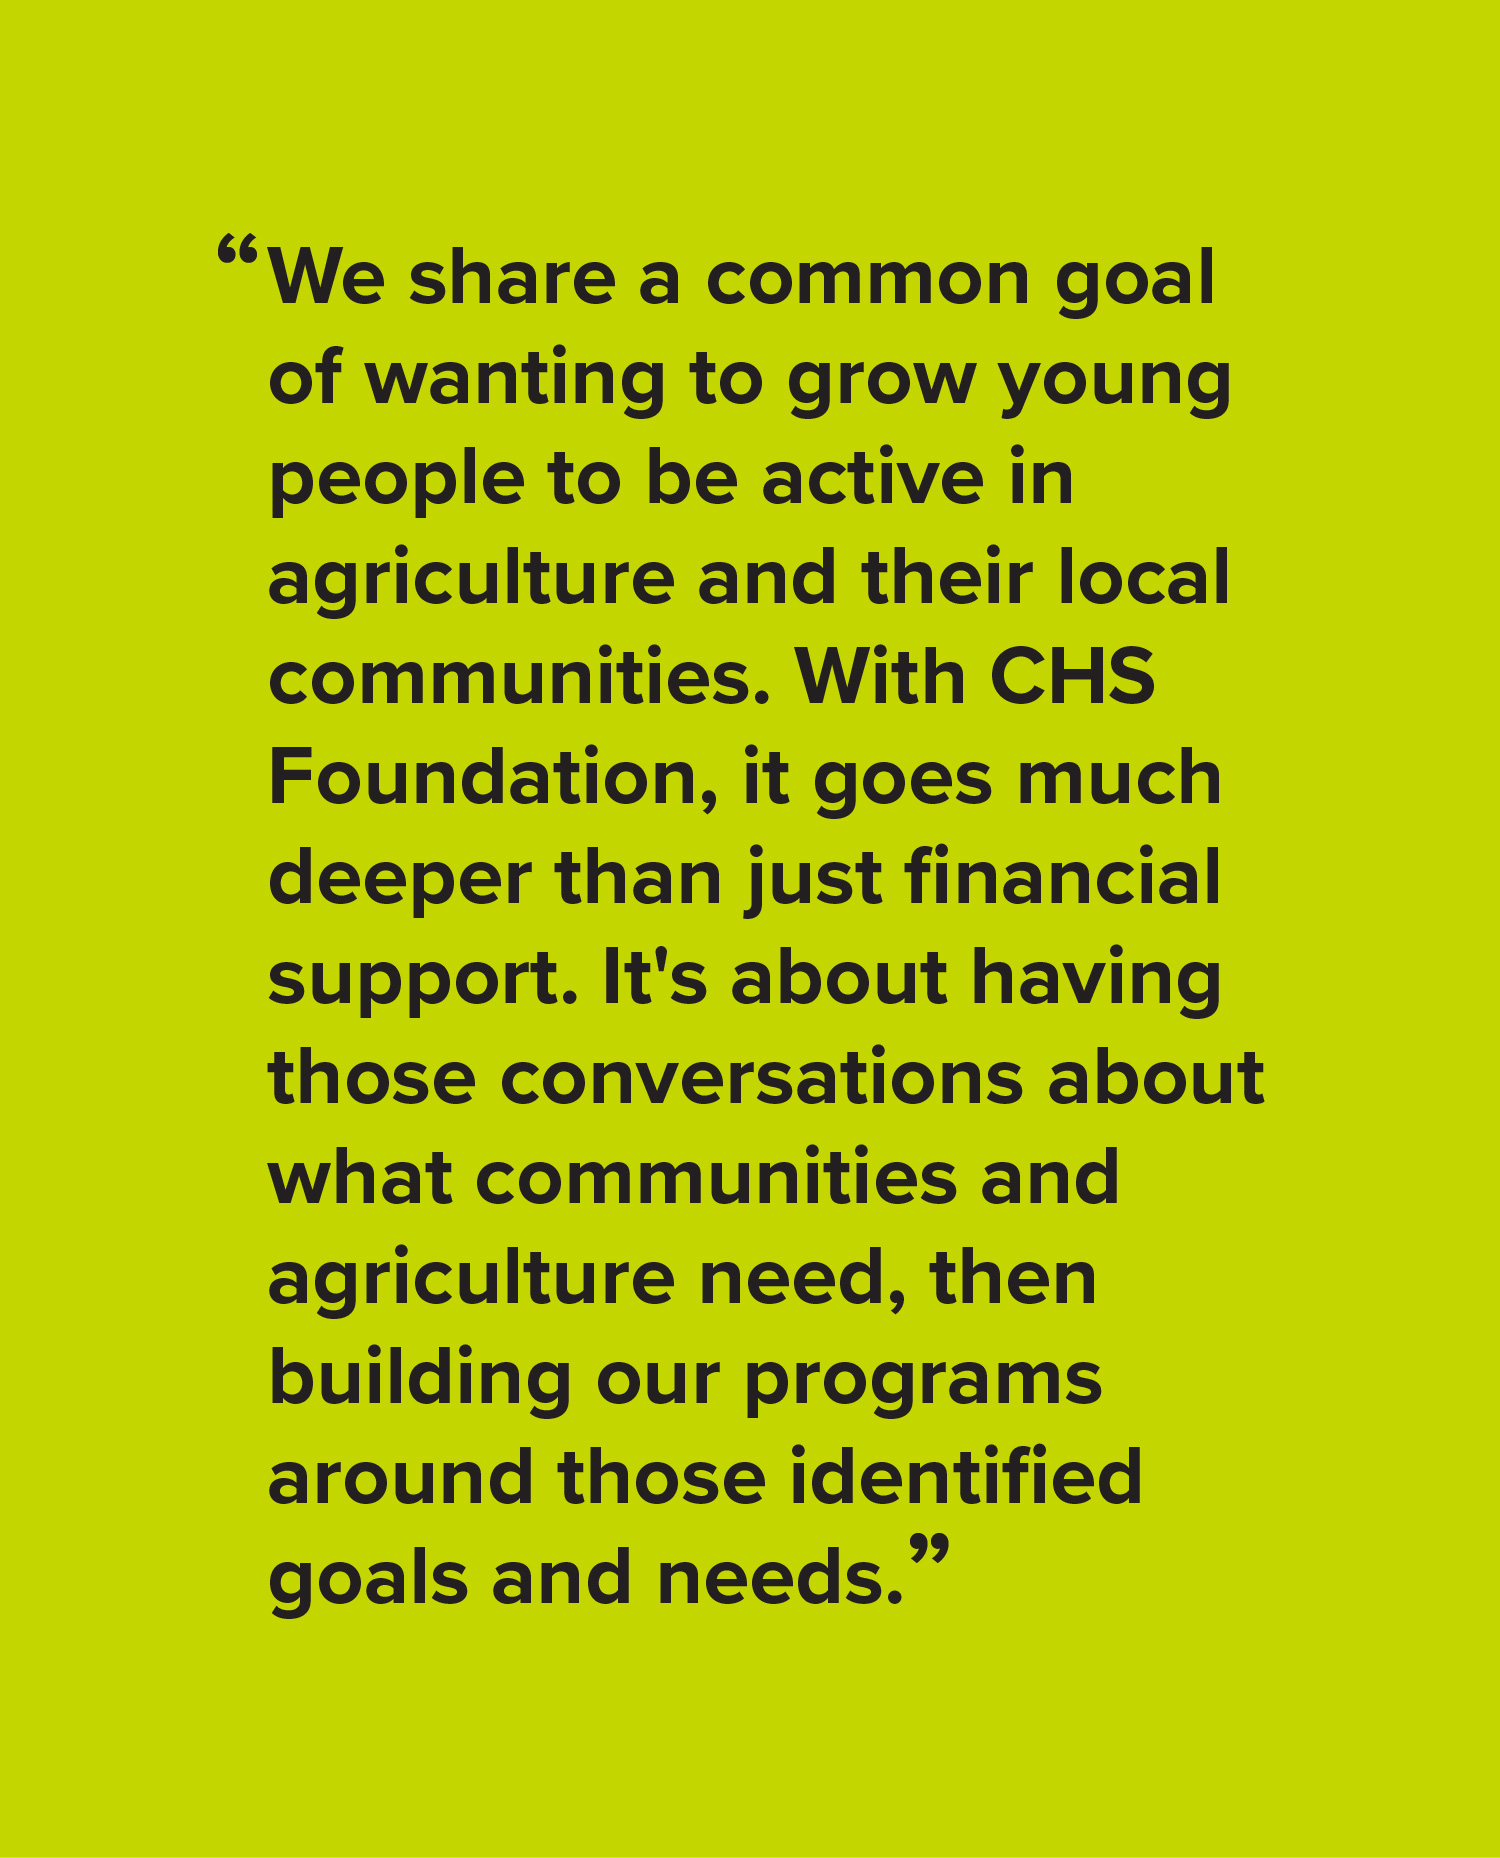 We share a common goal of wanting to grow young people to be active in agriculture and their local communities. With CHS Foundation, it goes much deeper than just financial support. It's about having those conversations about what communities and agriculture need, then building our programs around those identified goals and needs.